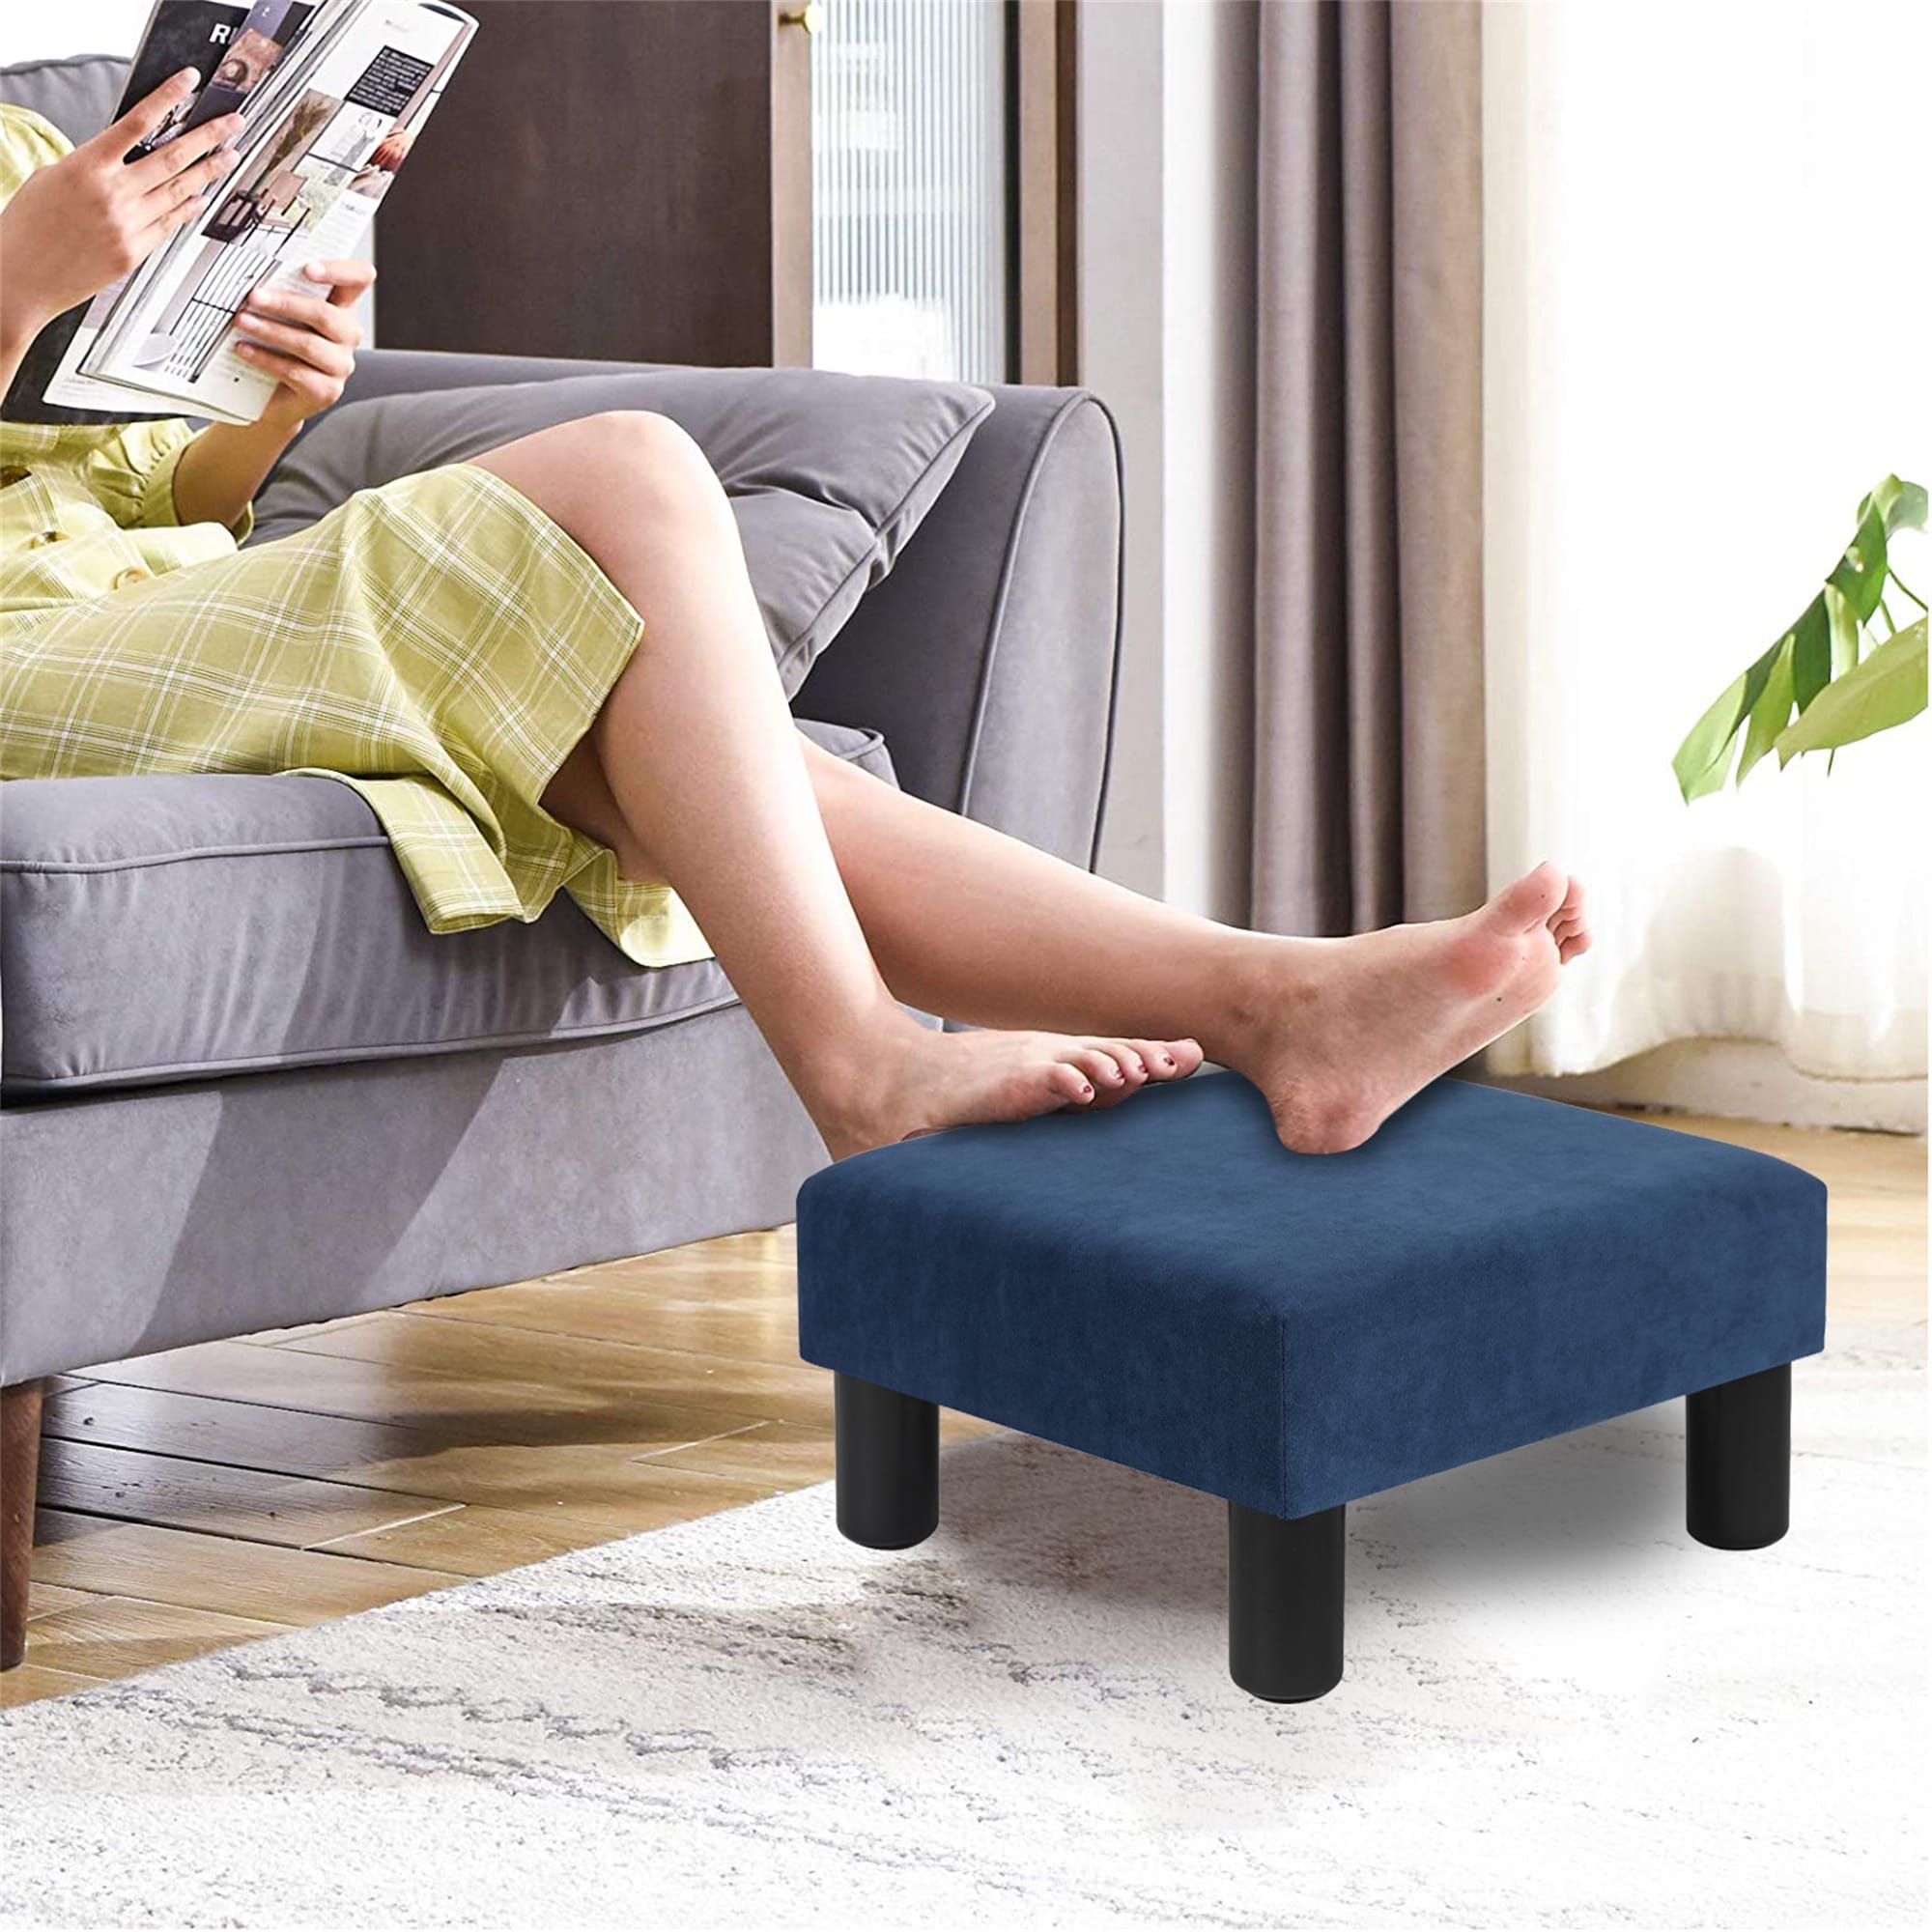 https://ak1.ostkcdn.com/images/products/is/images/direct/941e494525c4c838a9cfe611a2ca3c44131f6c24/Adeco-Ottoman-Upholstered-Fabric-Footrest-Pet-Steps-Dog-Stair-Stool%2CFootstool---Footrest---Geometric-Art.jpg